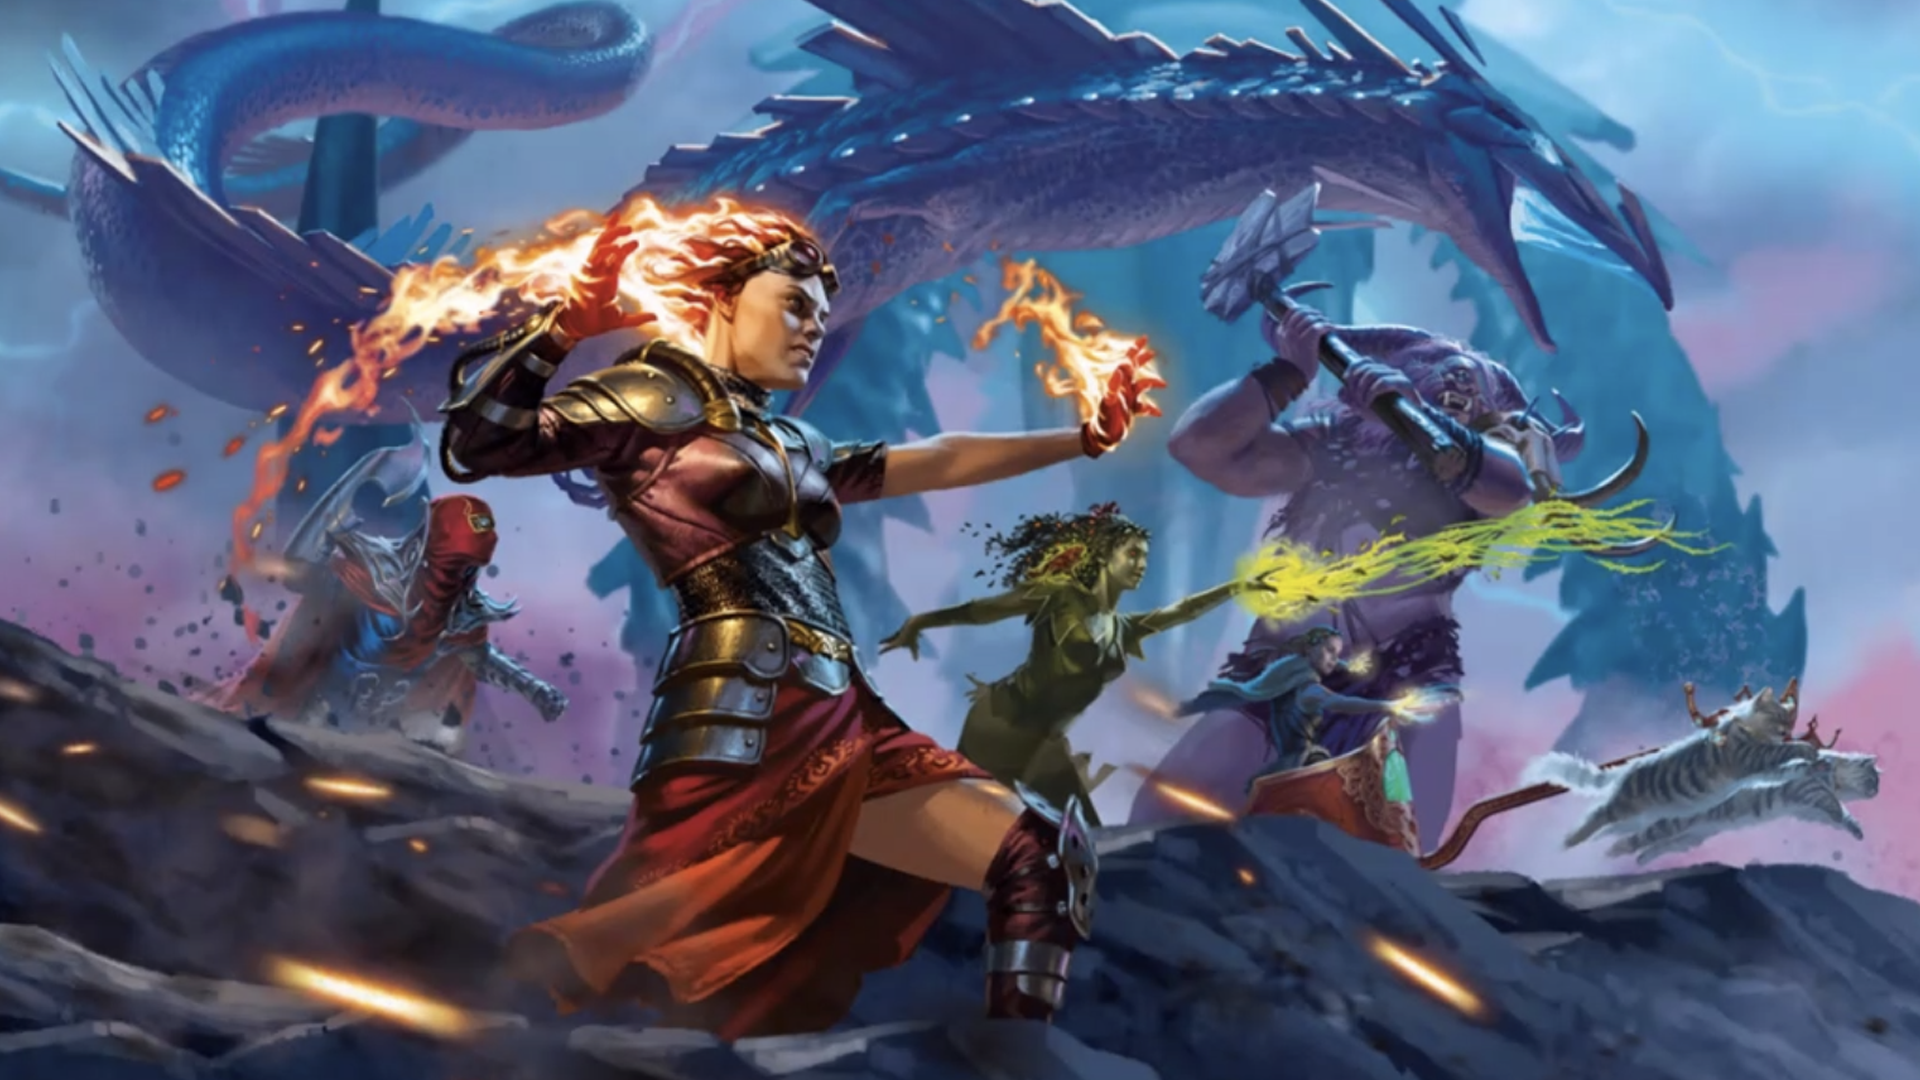 Artwork for Magic: The Gathering featured in Wizards Presents 2022 event.